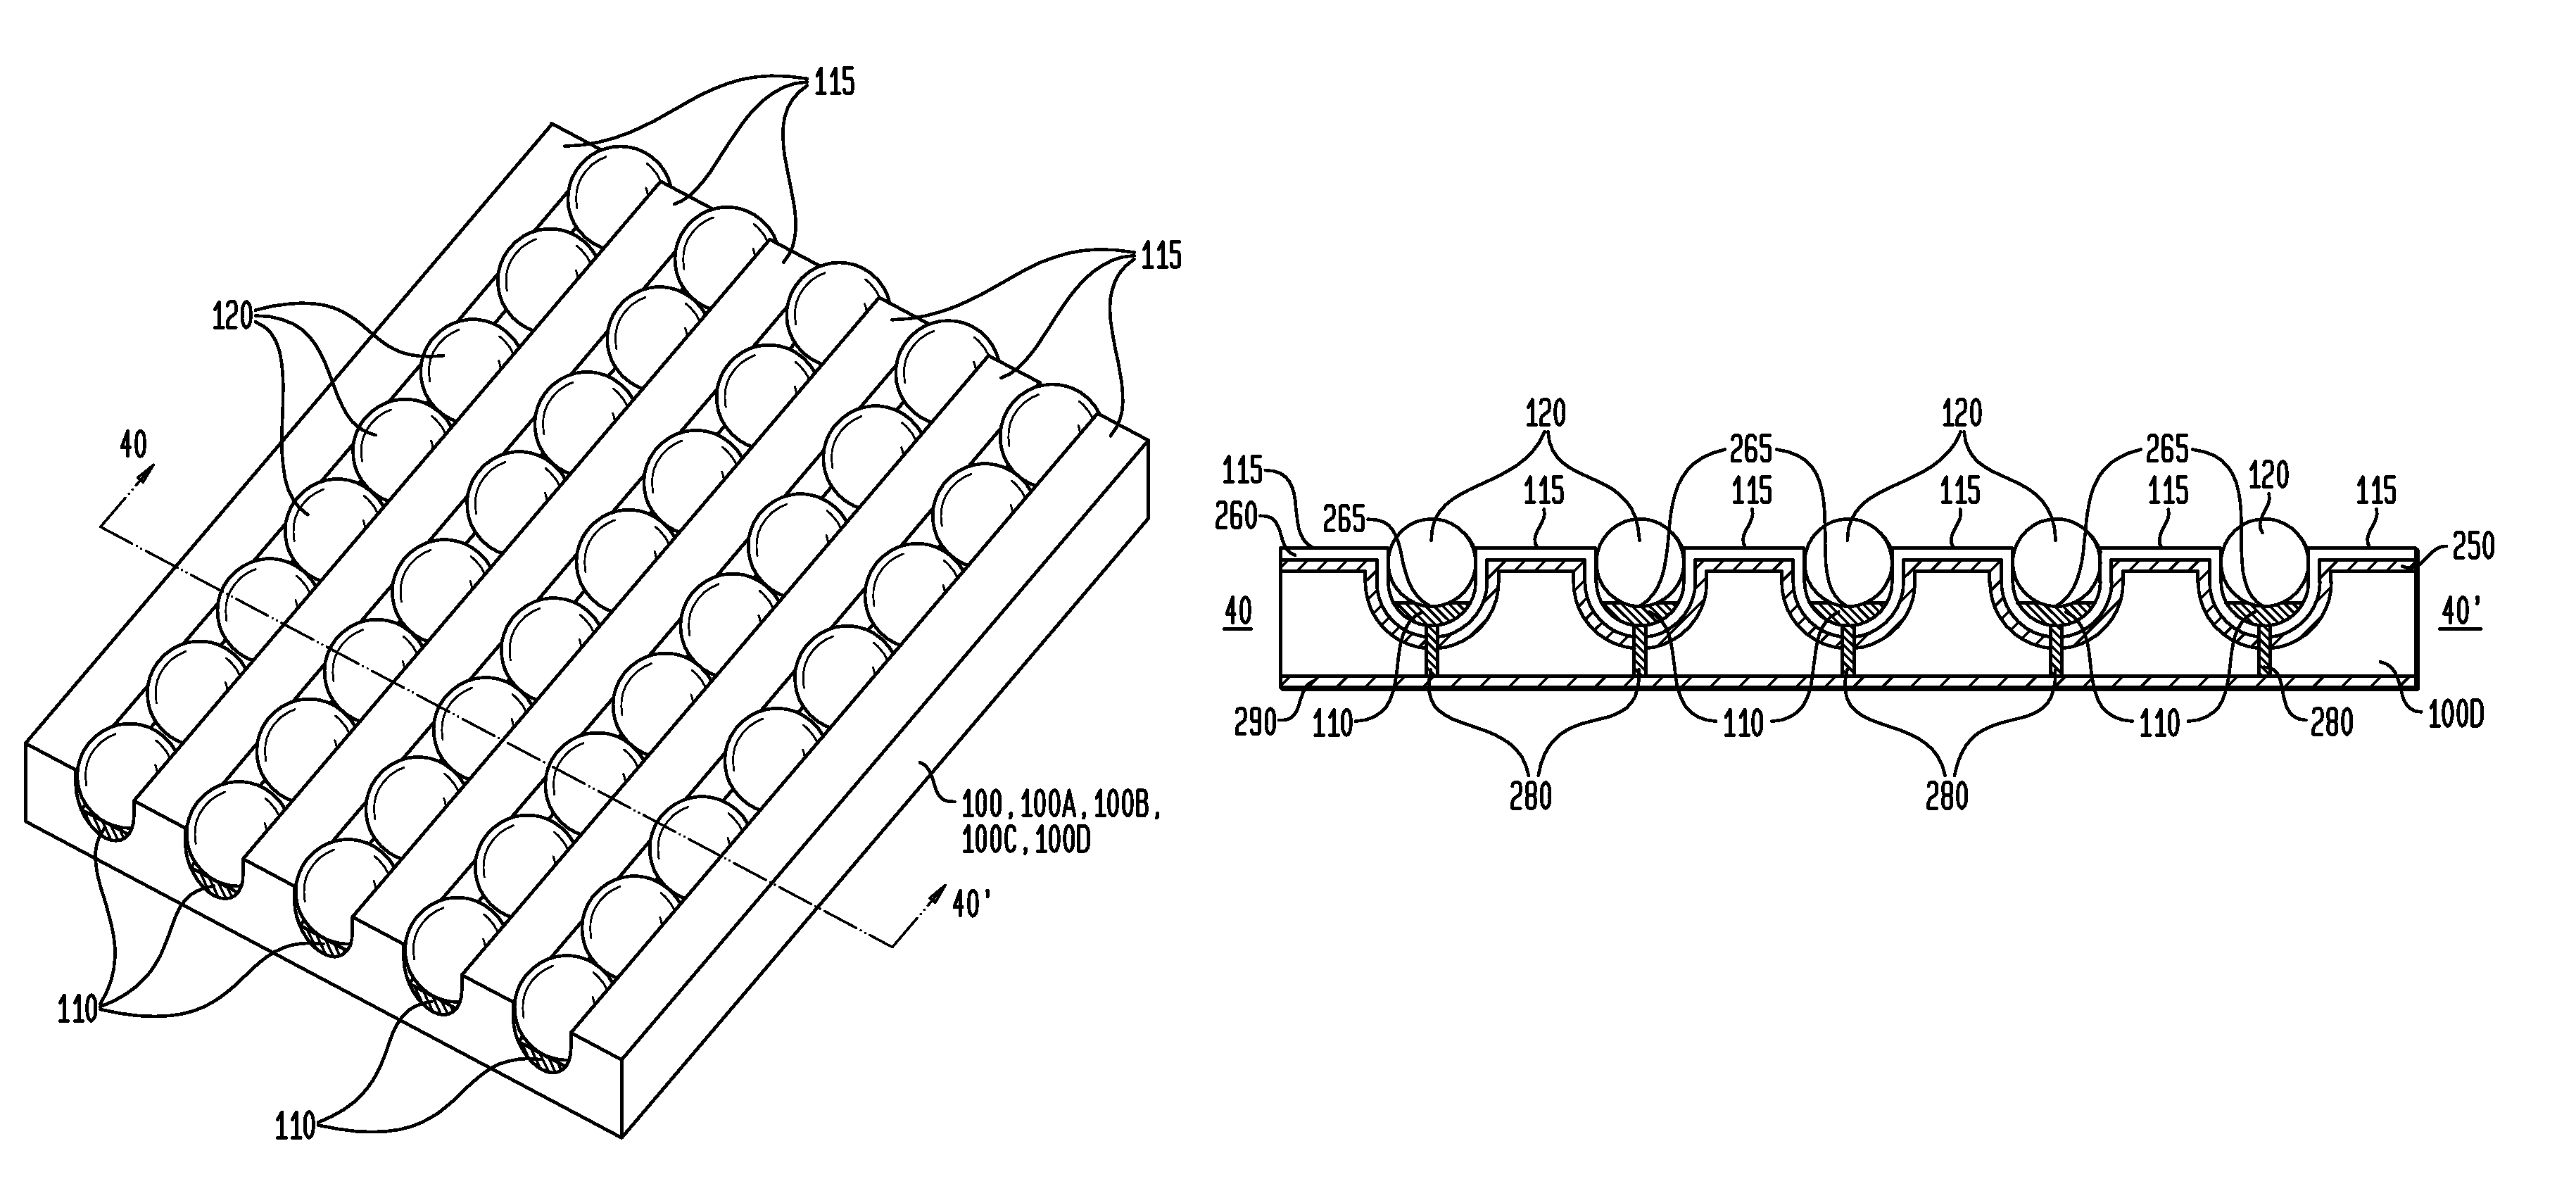 Method of manufacturing a light emitting, photovoltaic or other electronic apparatus and system